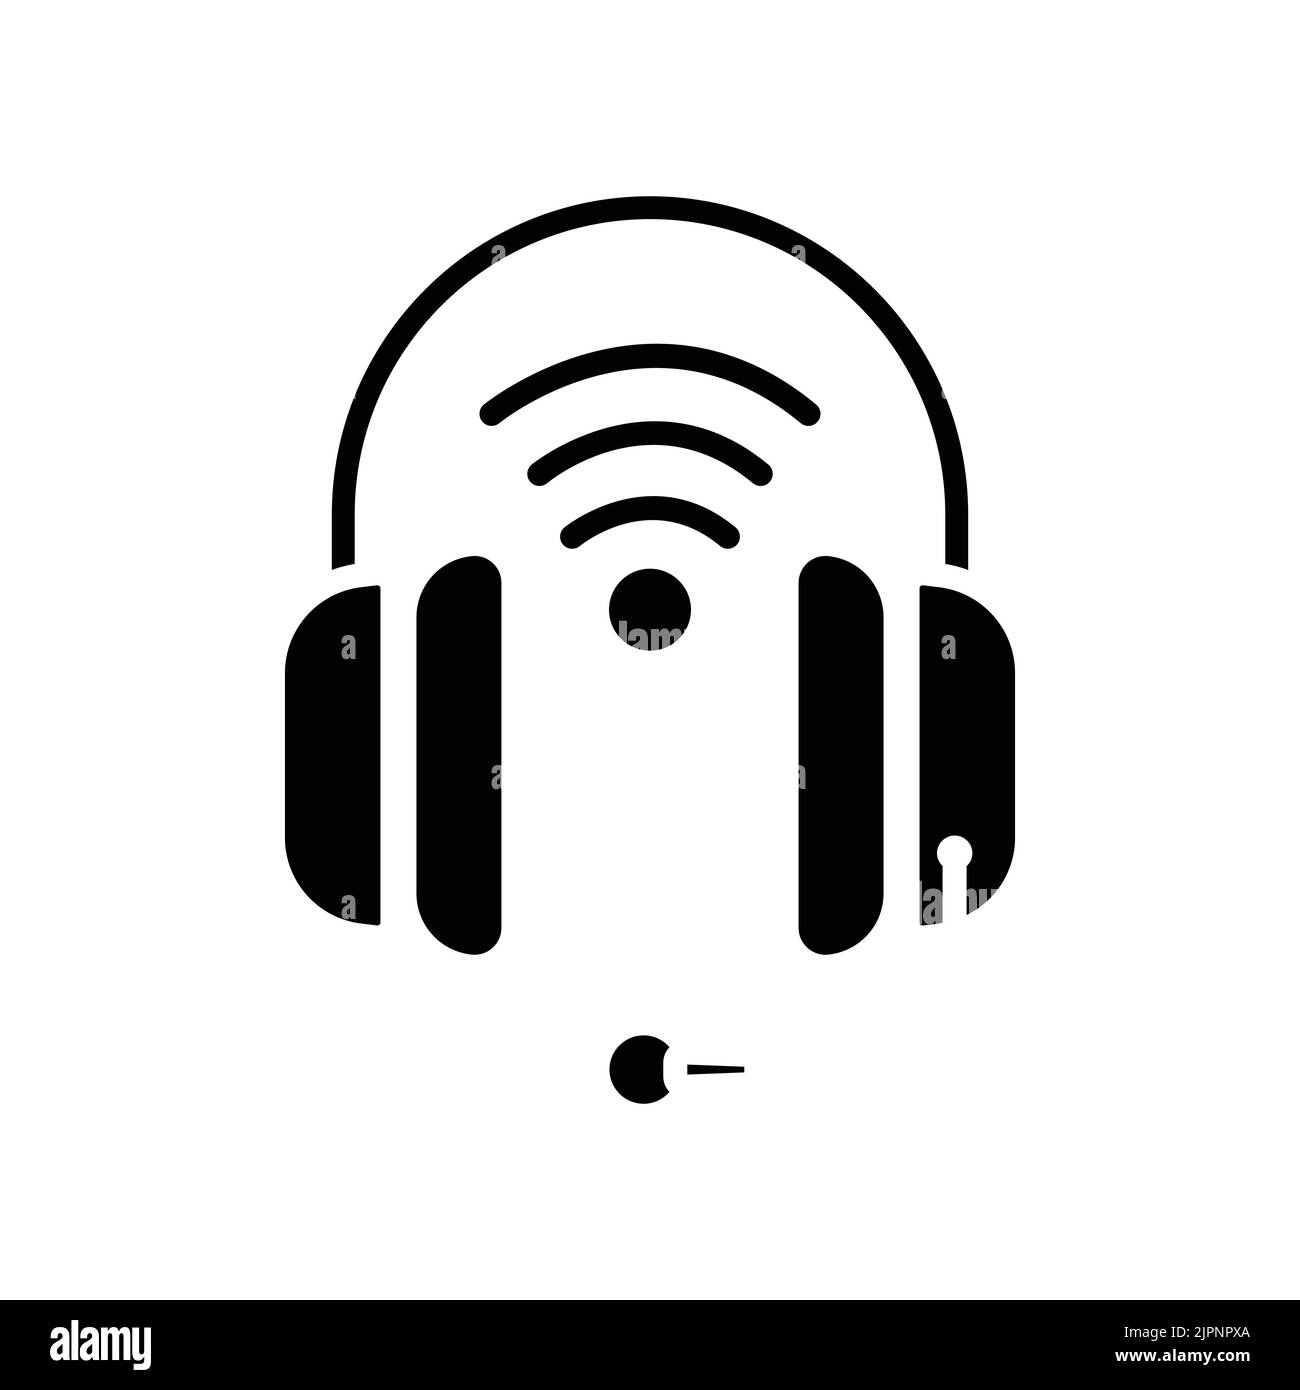 Headphone icon with signal. icon related to electronic, technology, smart device. Glyph icon style, solid. Simple design editable Stock Vector